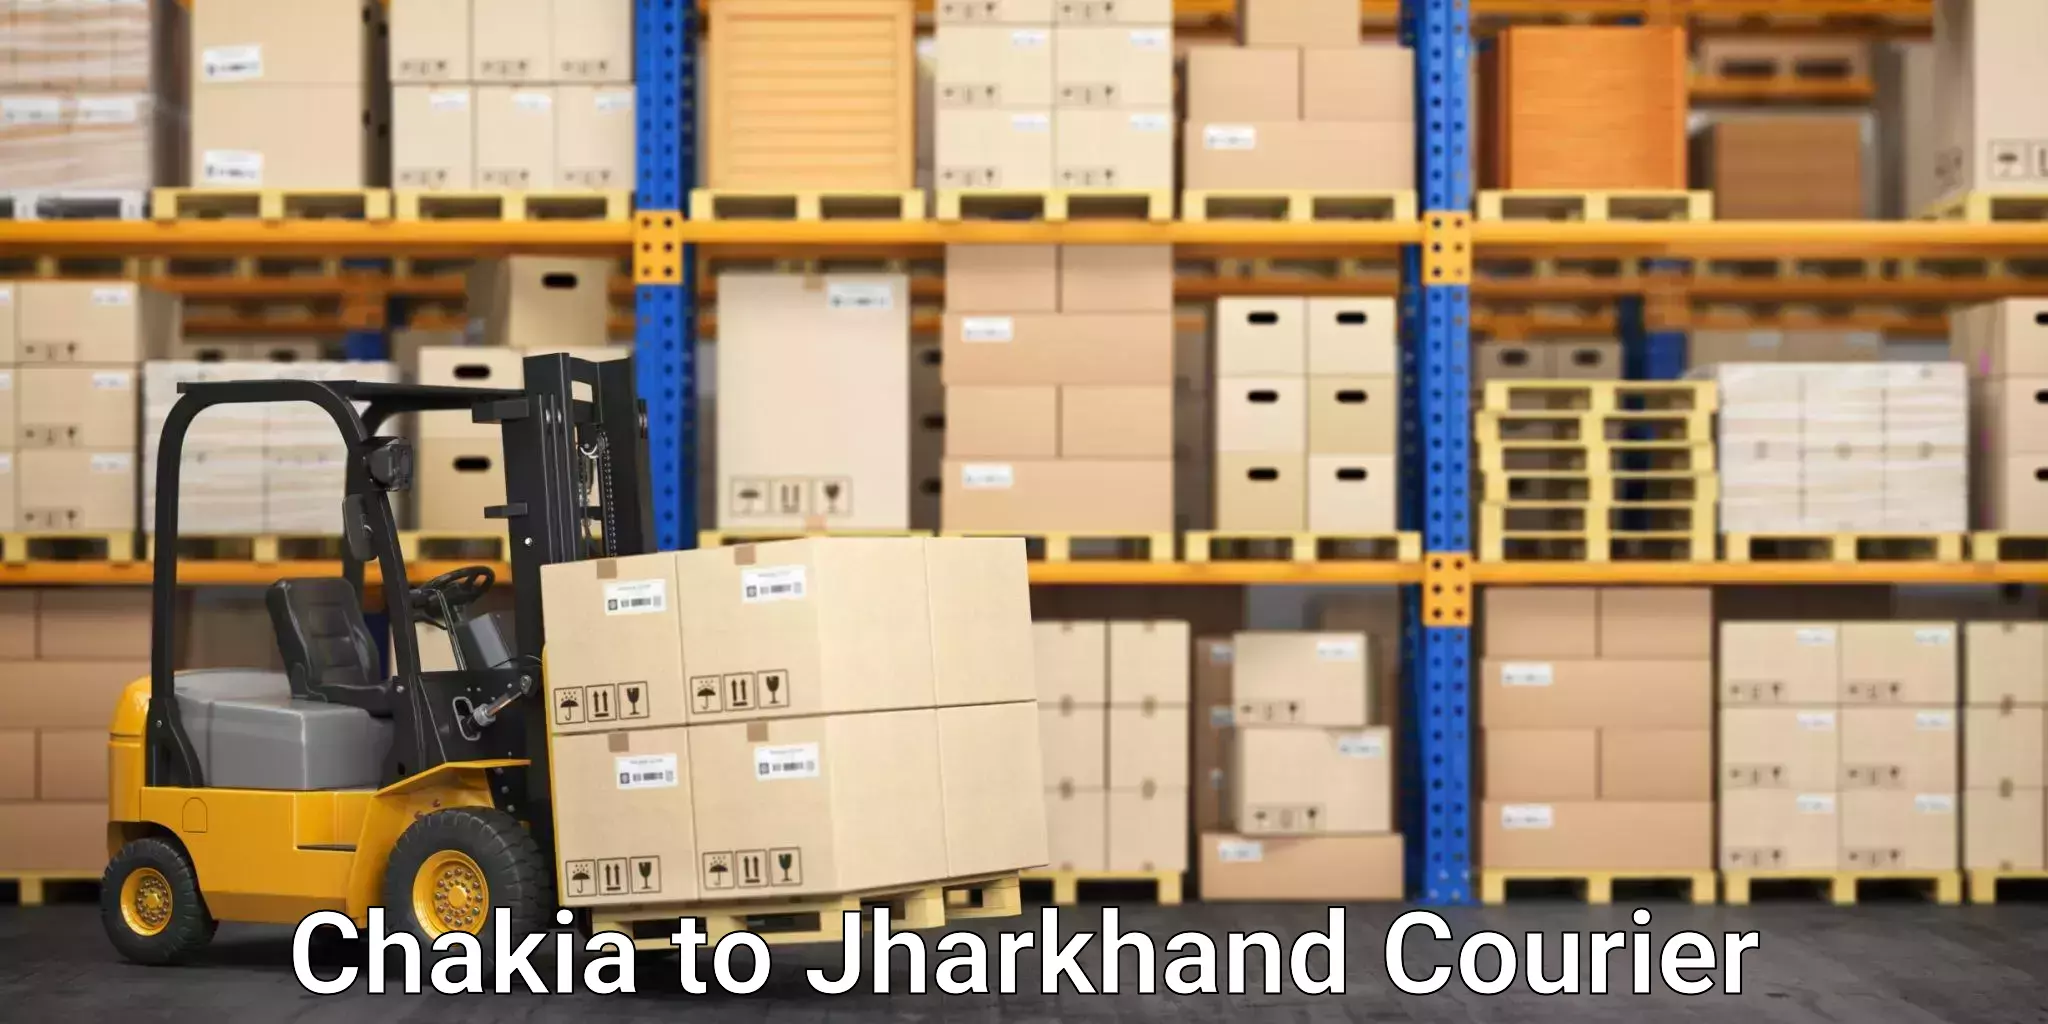 Professional relocation services Chakia to Jharkhand